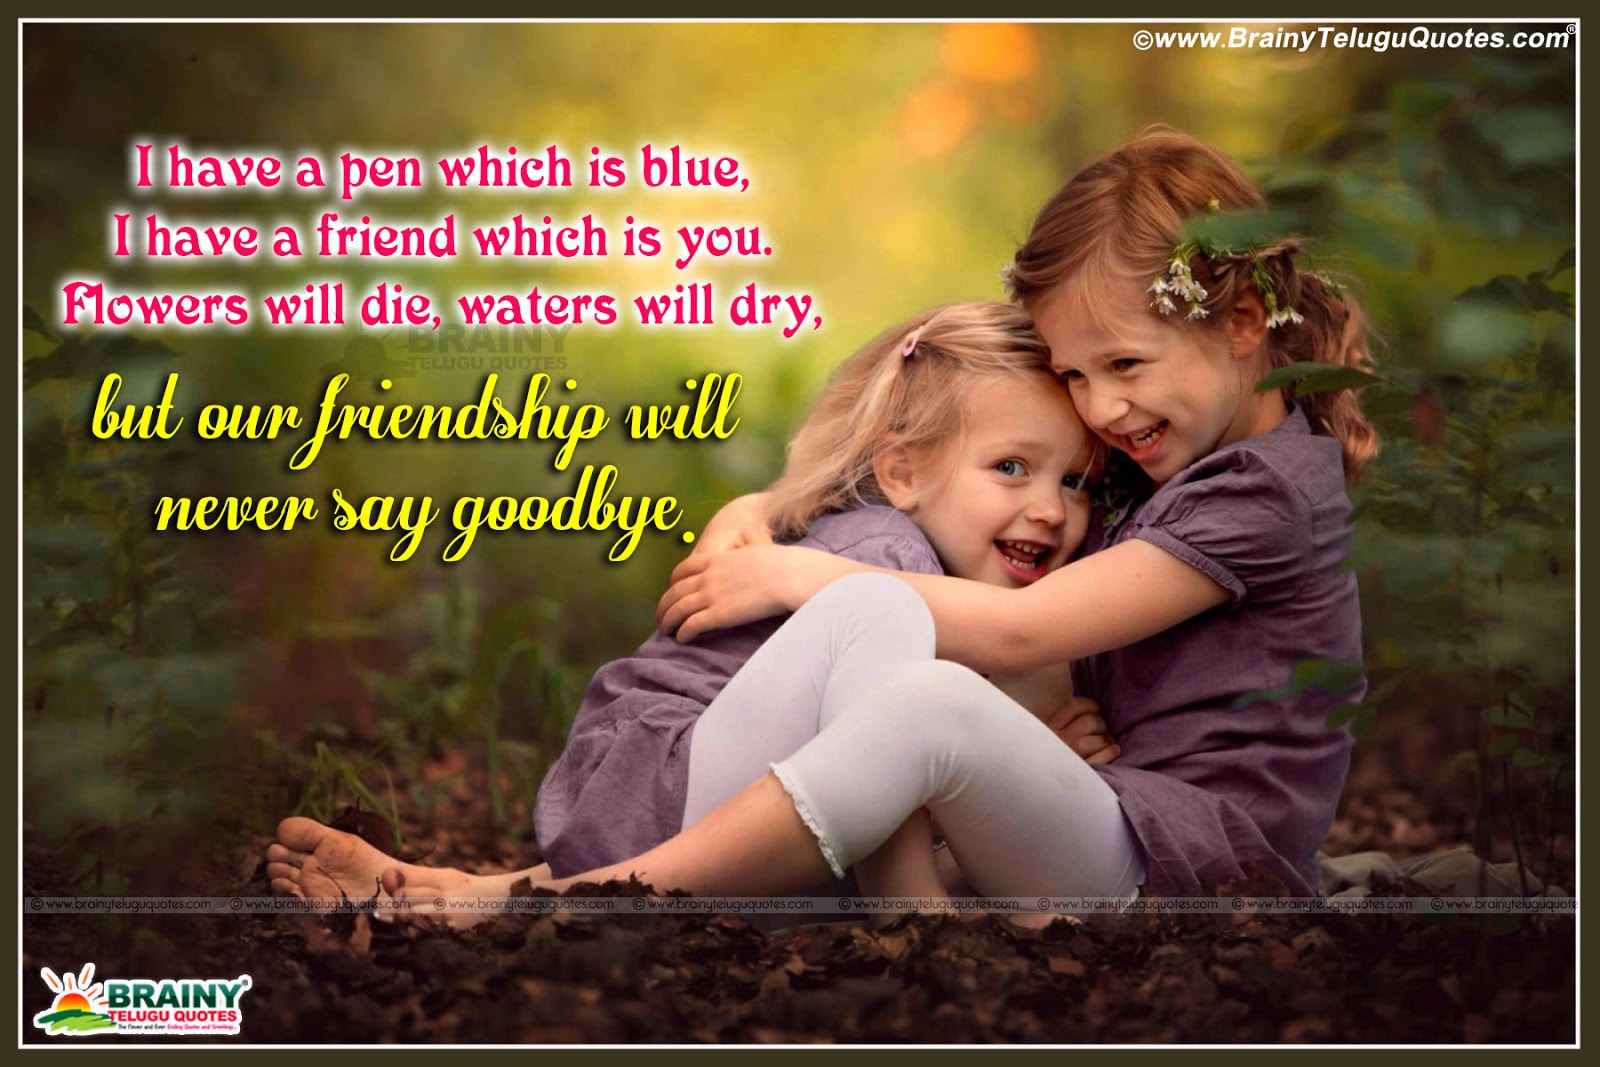 nice wallpapers of friendship,people in nature,love,text,friendship,adaptation